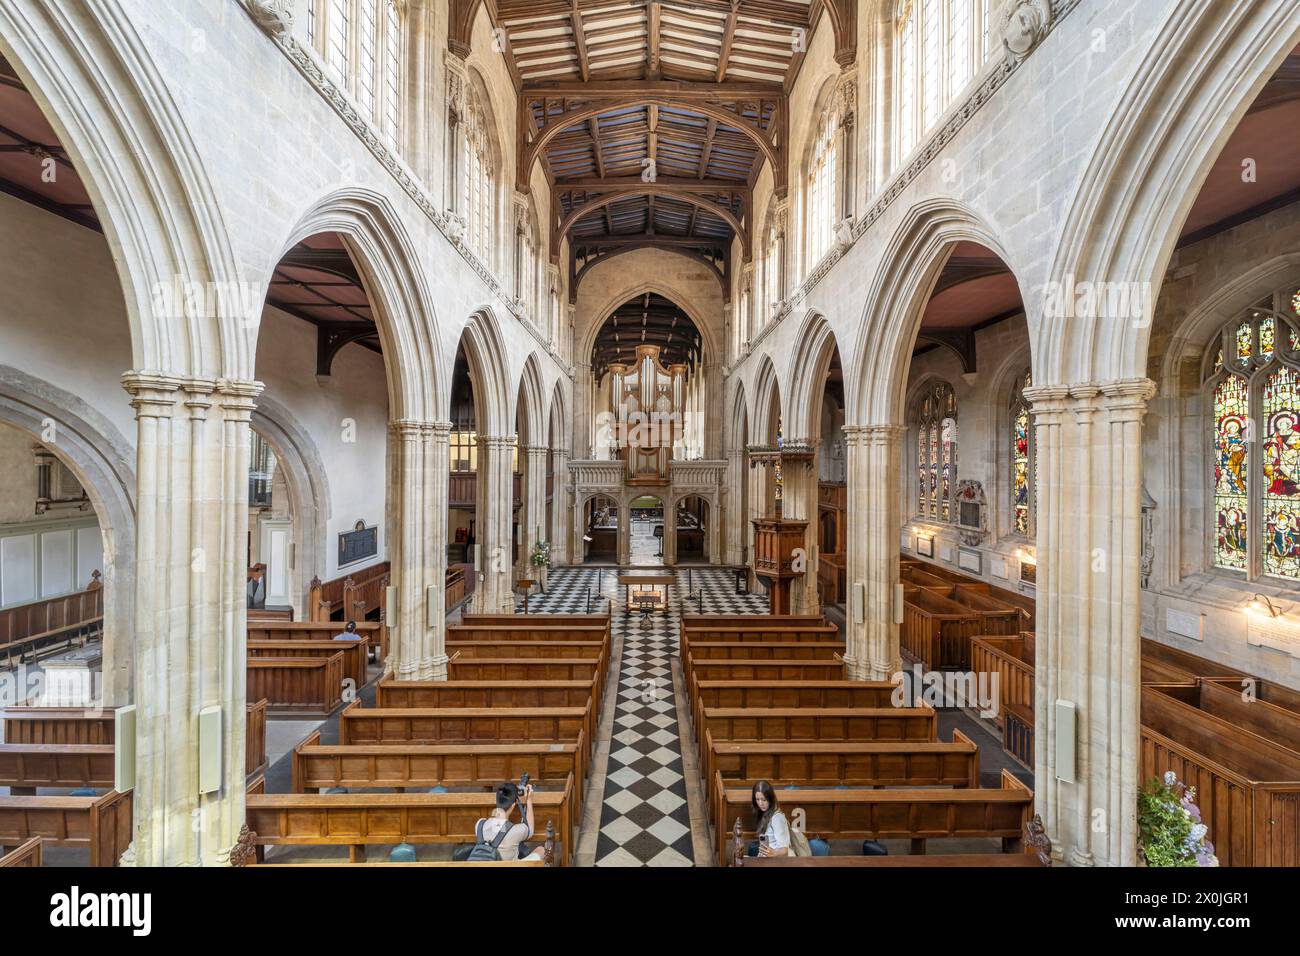 Interior of the university church Church of St Mary the Virgin in Oxford, Oxfordshire, England, Great Britain, Europe Stock Photo